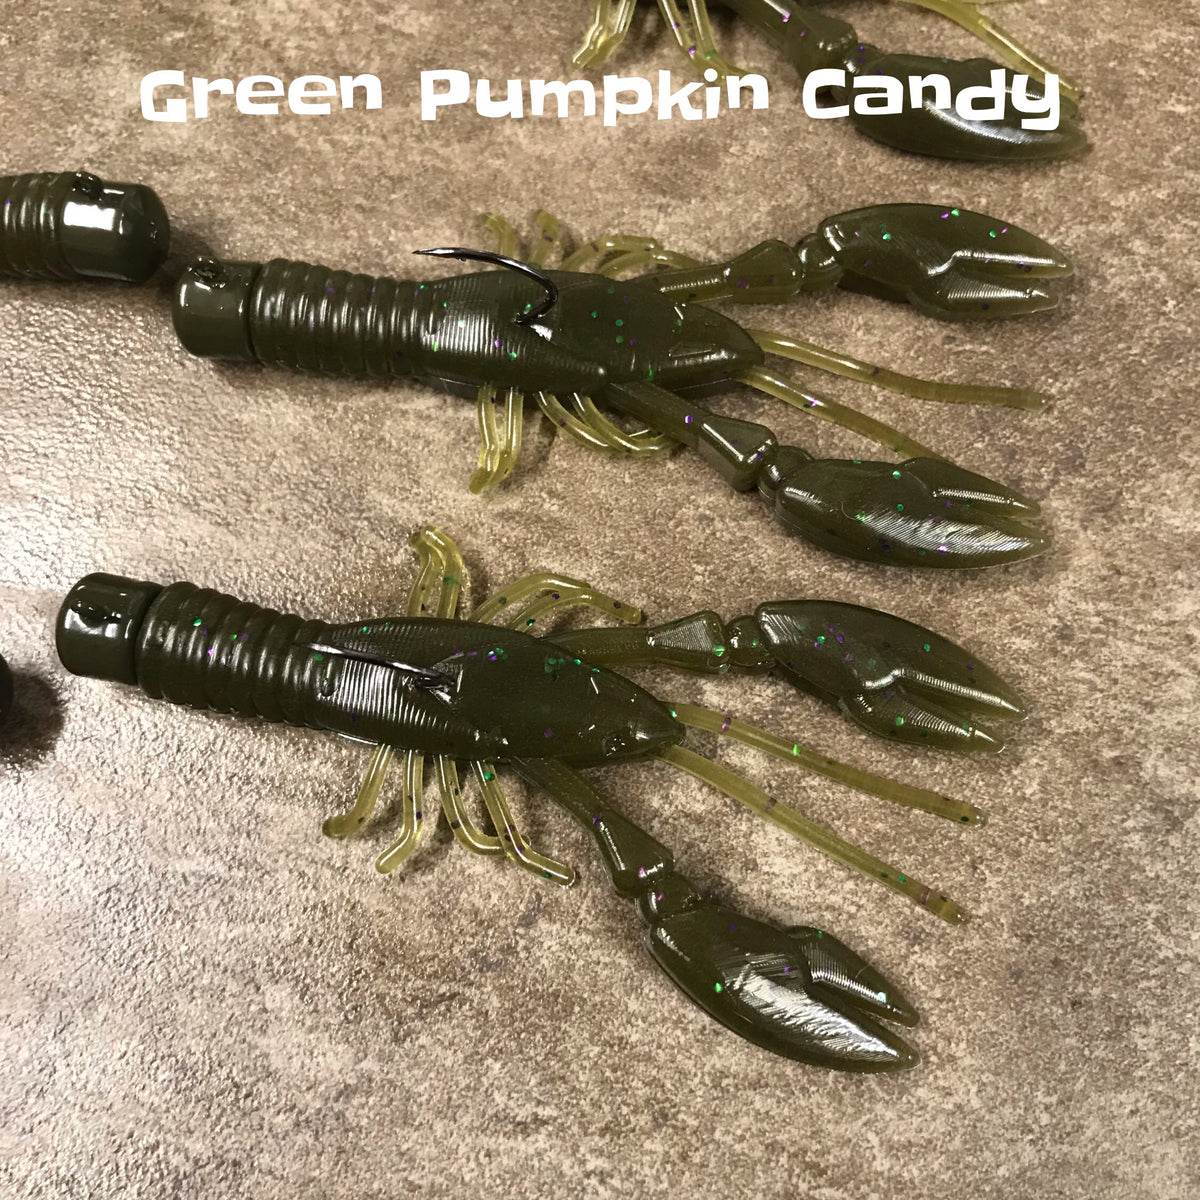 Ned Craw – On the Spot Baits